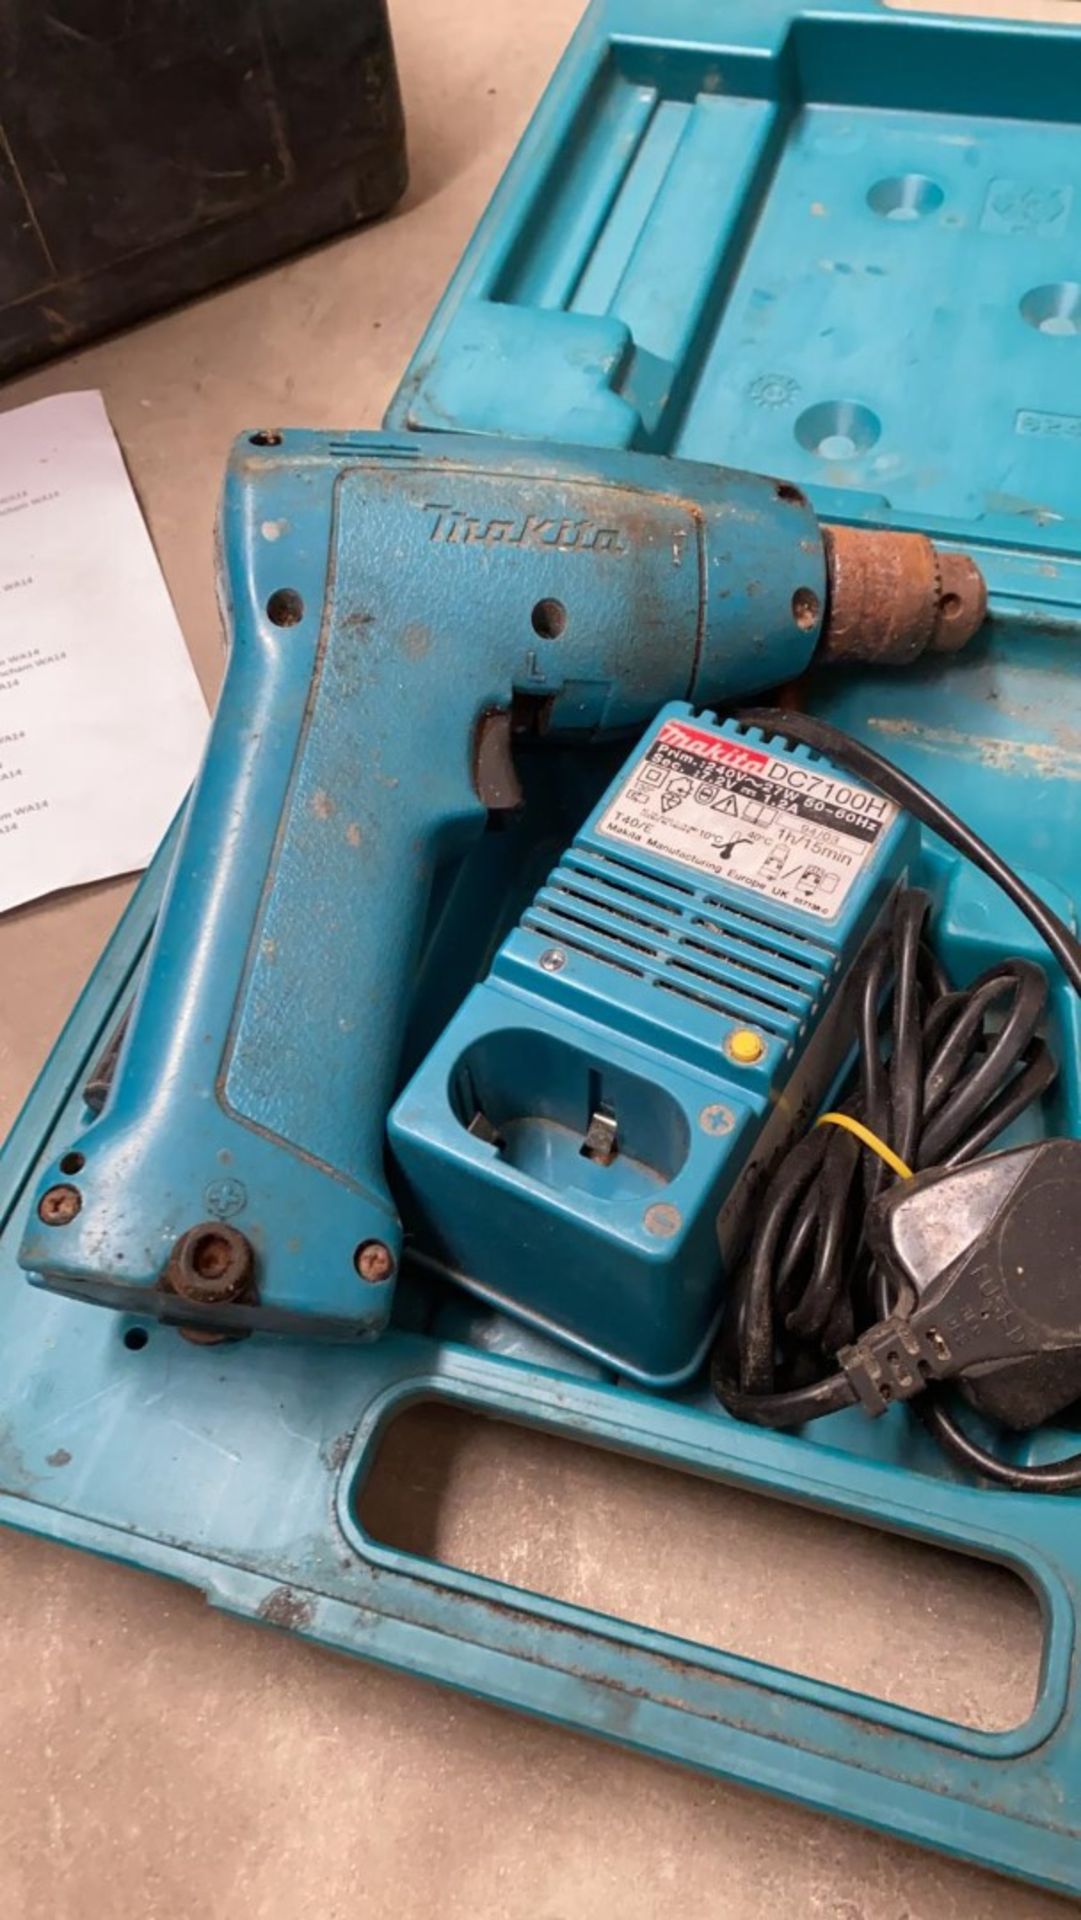 1 x Makita Cordless Drill - Used, Recently Removed From A Working Site - CL505 - Ref: TL029 - - Image 2 of 3